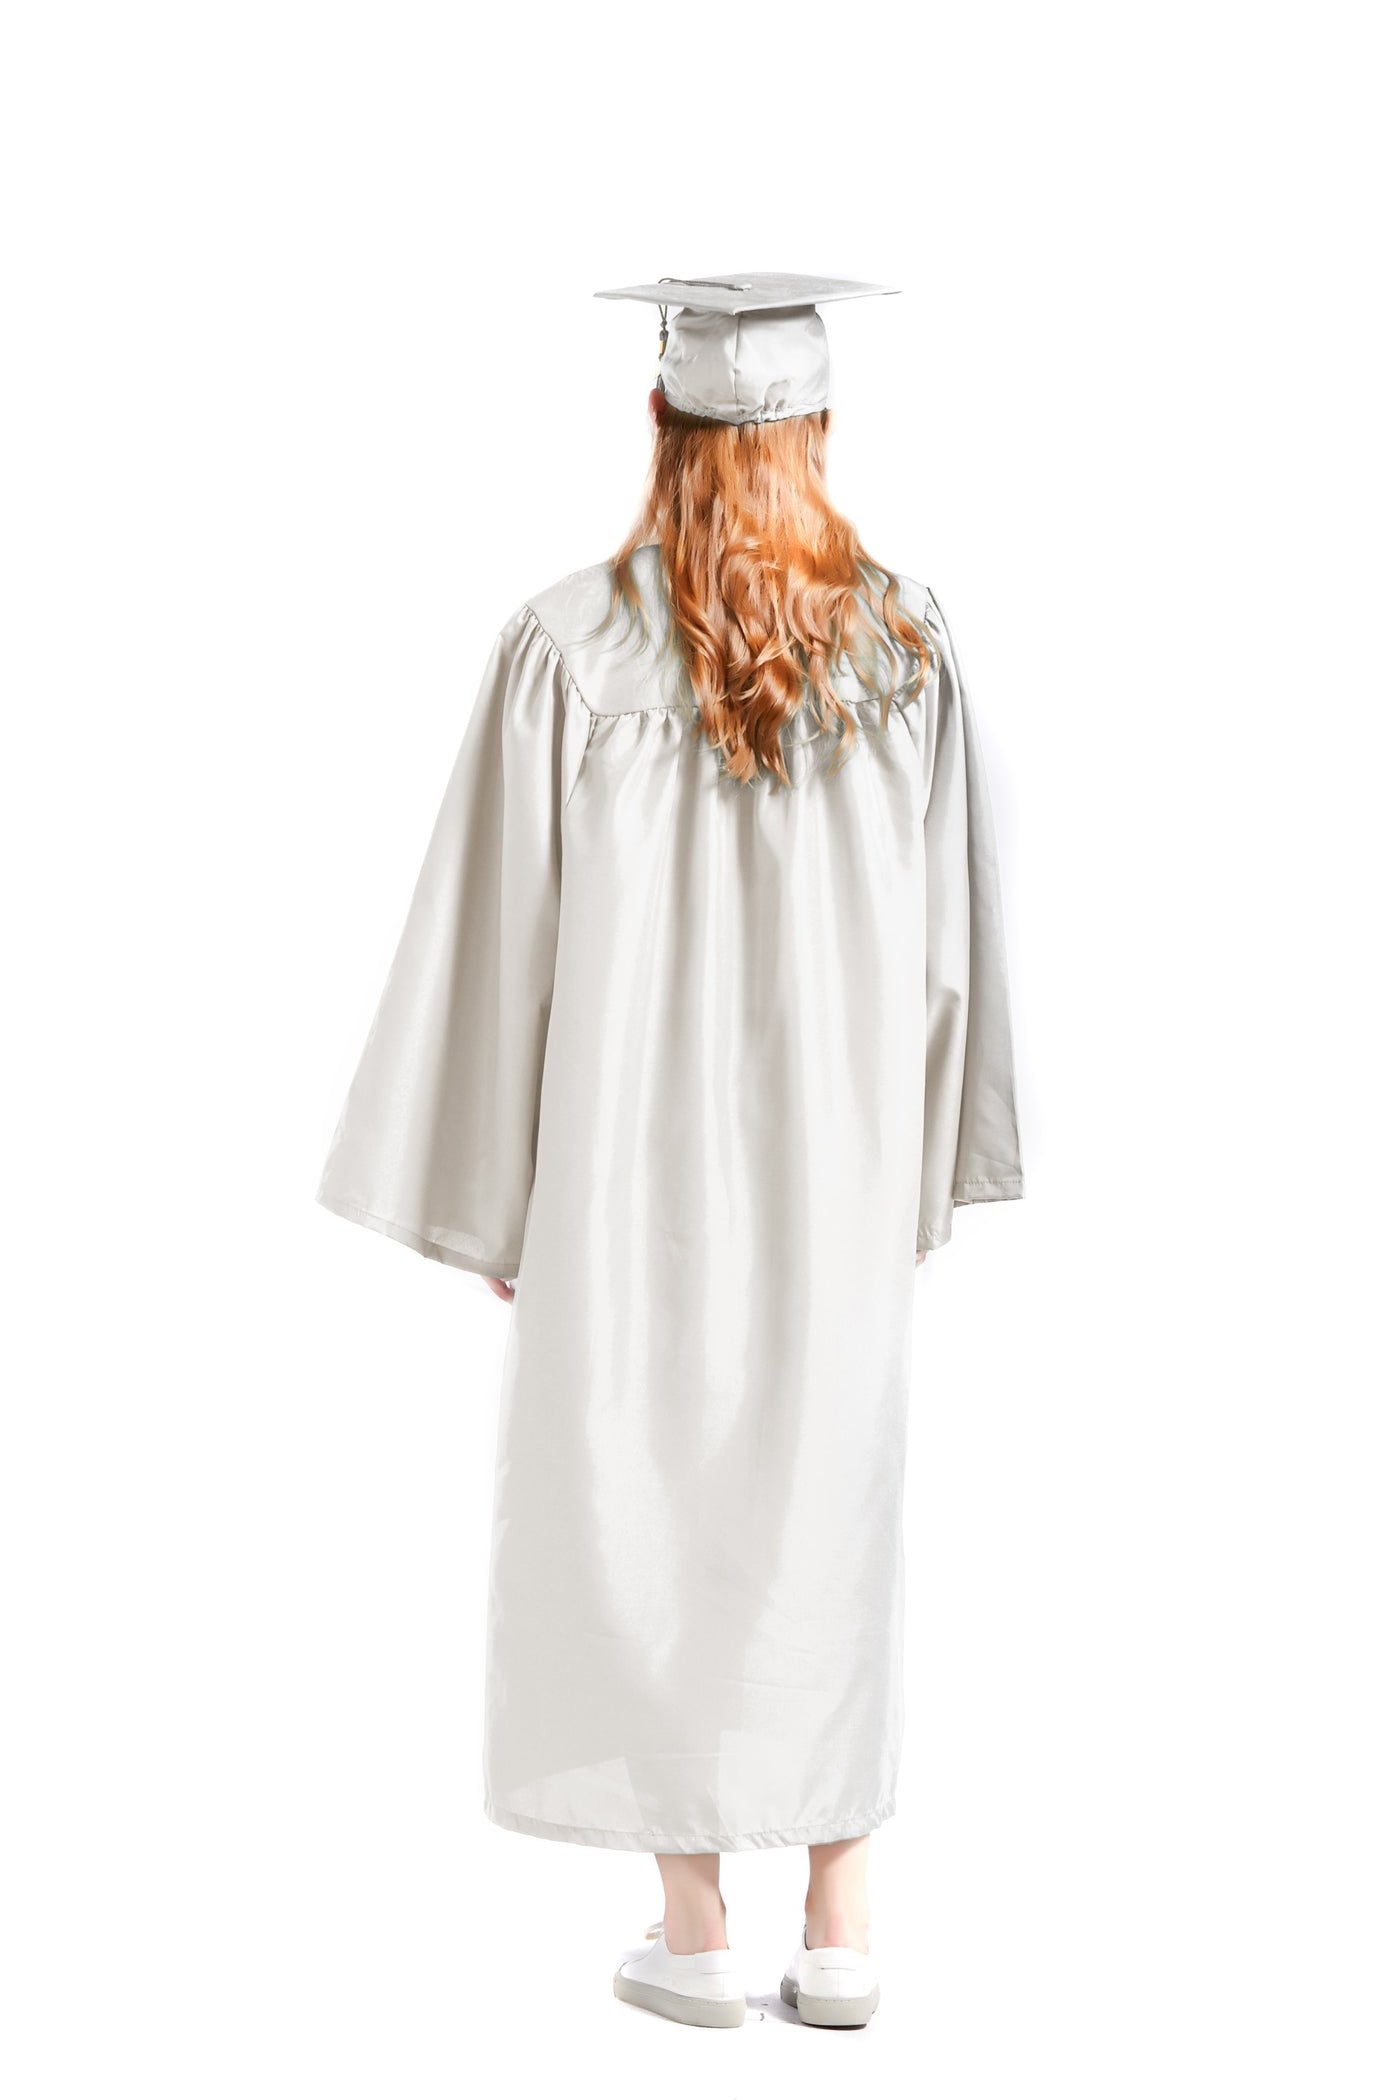 Graduation Cap Gown 2023 & 2024 Year Charm for College or High School Graduates